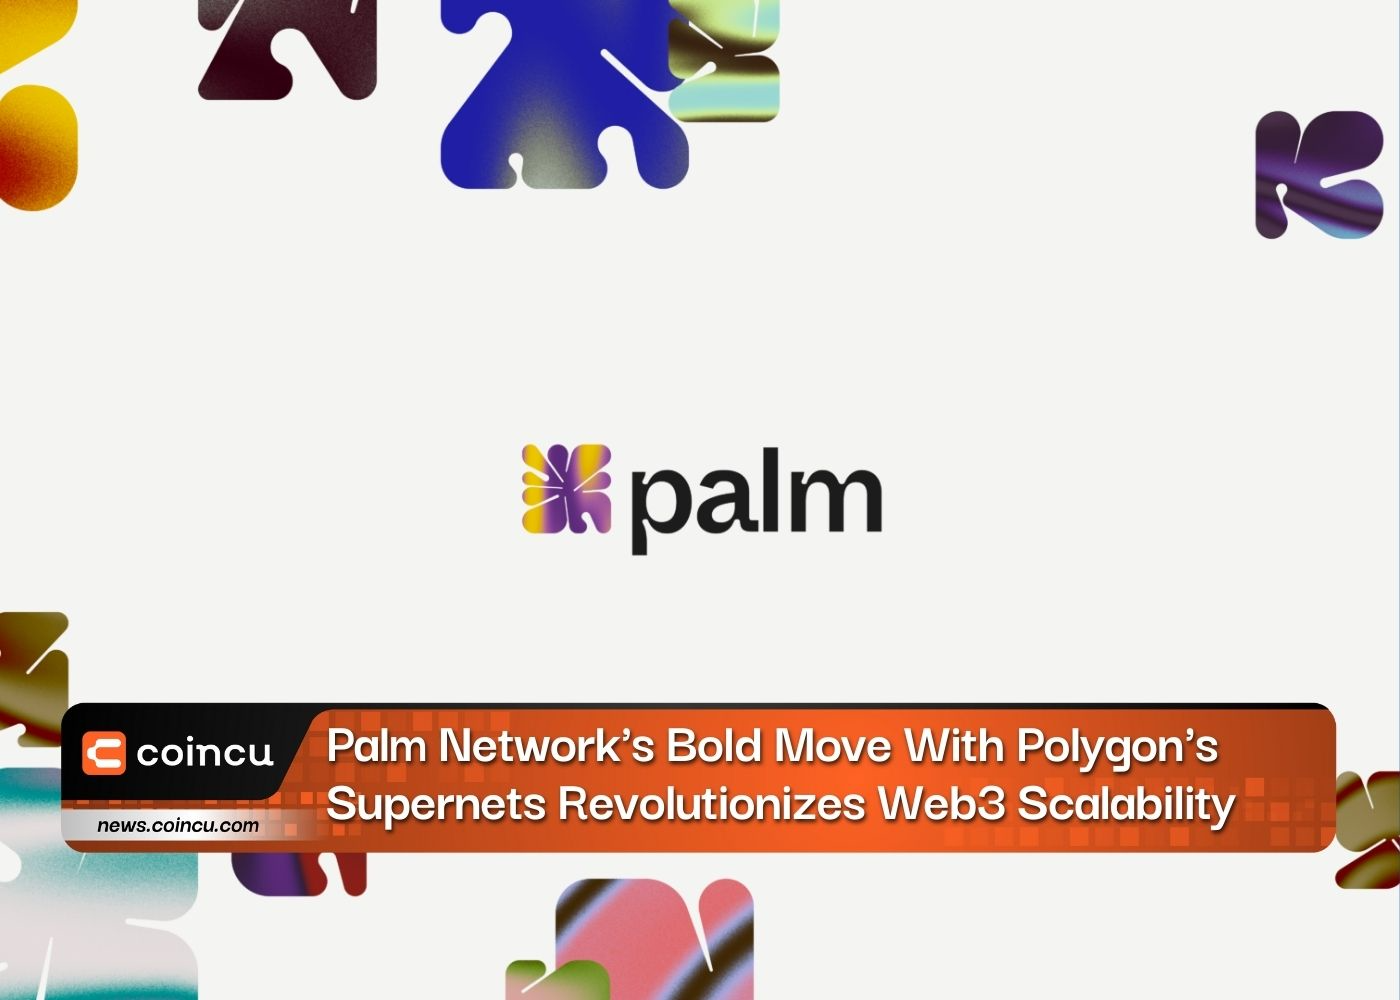 Palm Network's Bold Move With Polygon's Supernets Revolutionizes Web3 Scalability